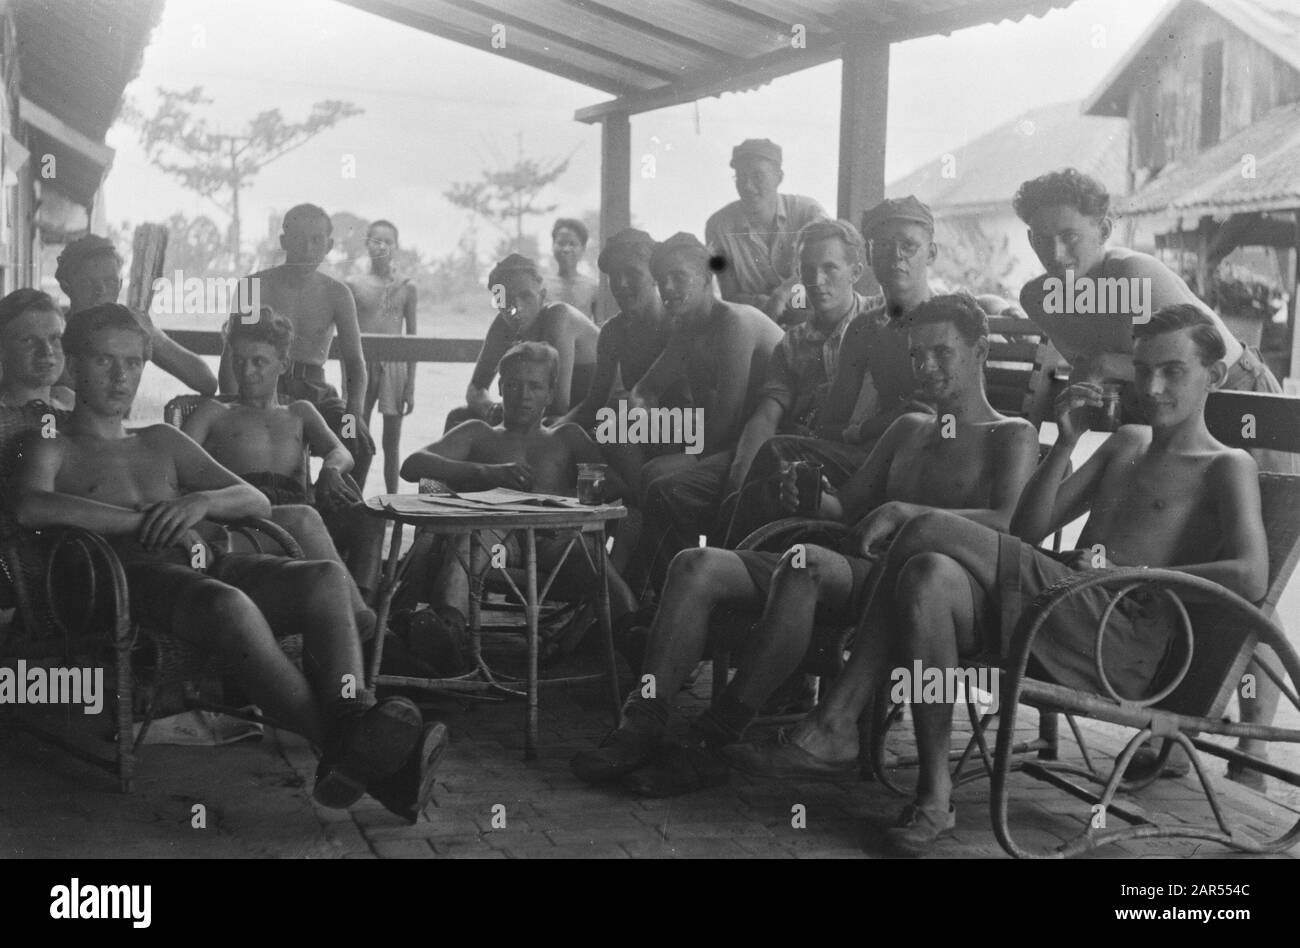 Pladjoe-West Palembangs; 8th Department Field Artillery  Half past eleven, coffee time for the boys of staff 8th Afd. Art. The coffee is good and the cafeteria boss only charges a dime. Date: November 1947 Location: Indonesia, Dutch East Indies, Palembangs, Plaju, Sumatra Stock Photo